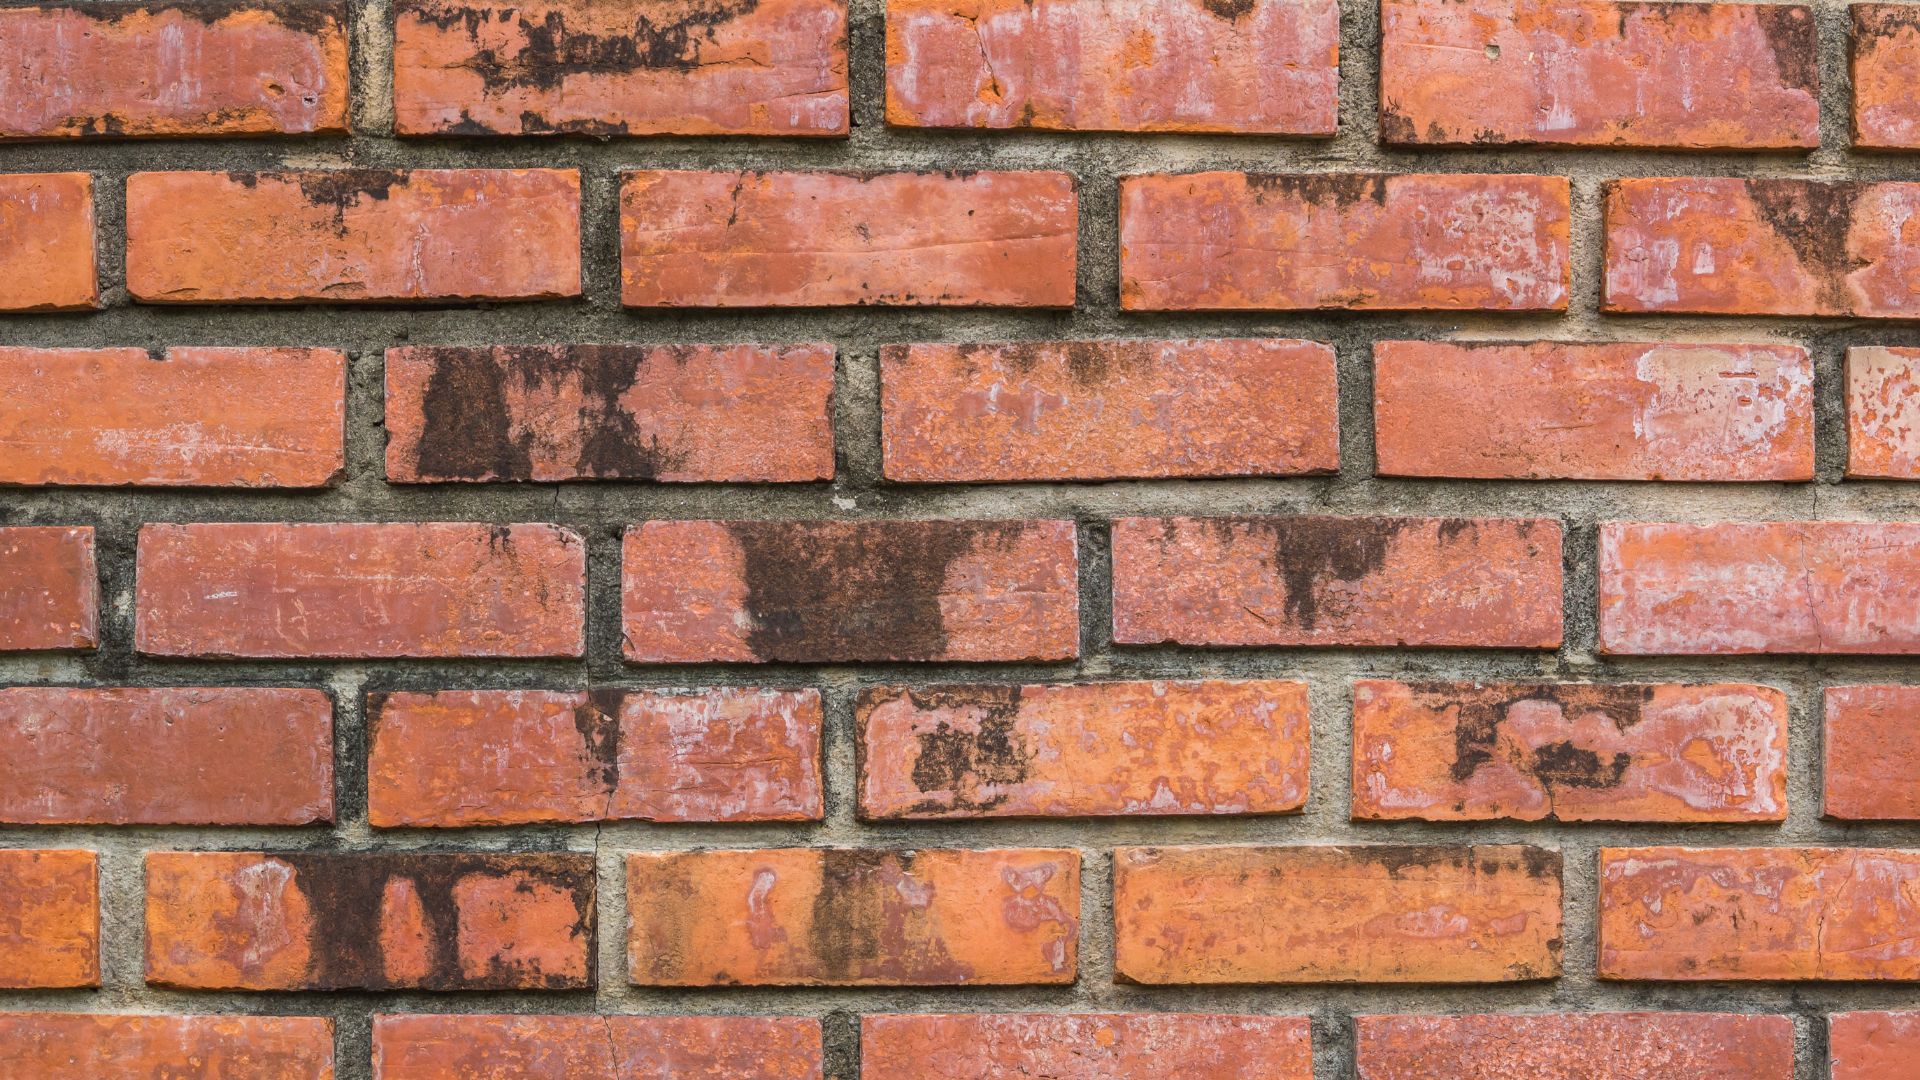 Should You Clean A Brick Wall With A Pressure Washer?